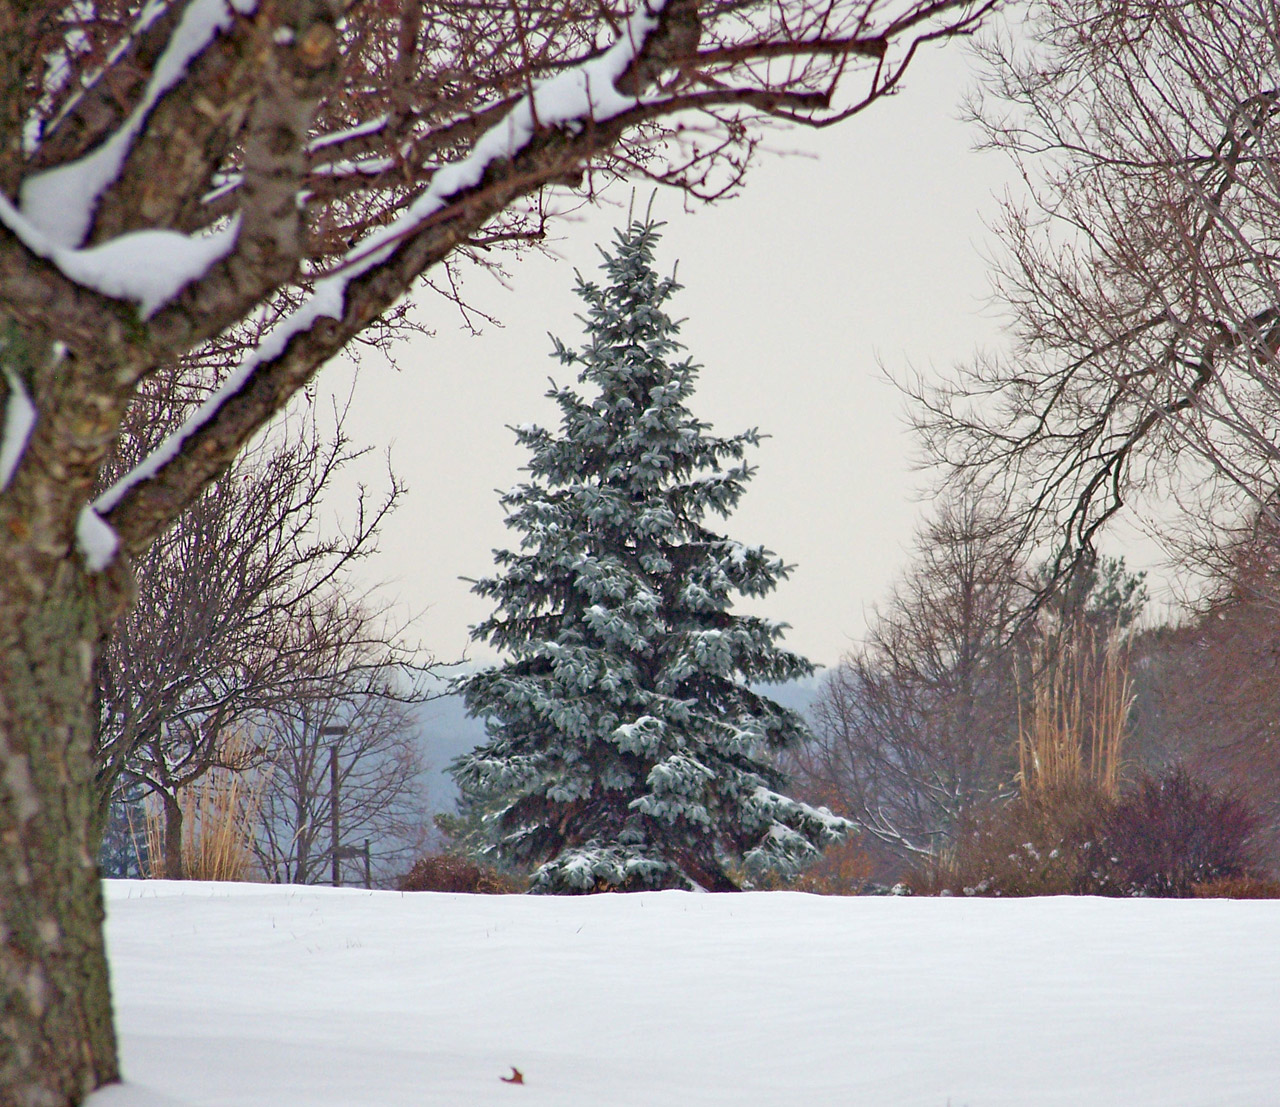 An evergreen tree in snow